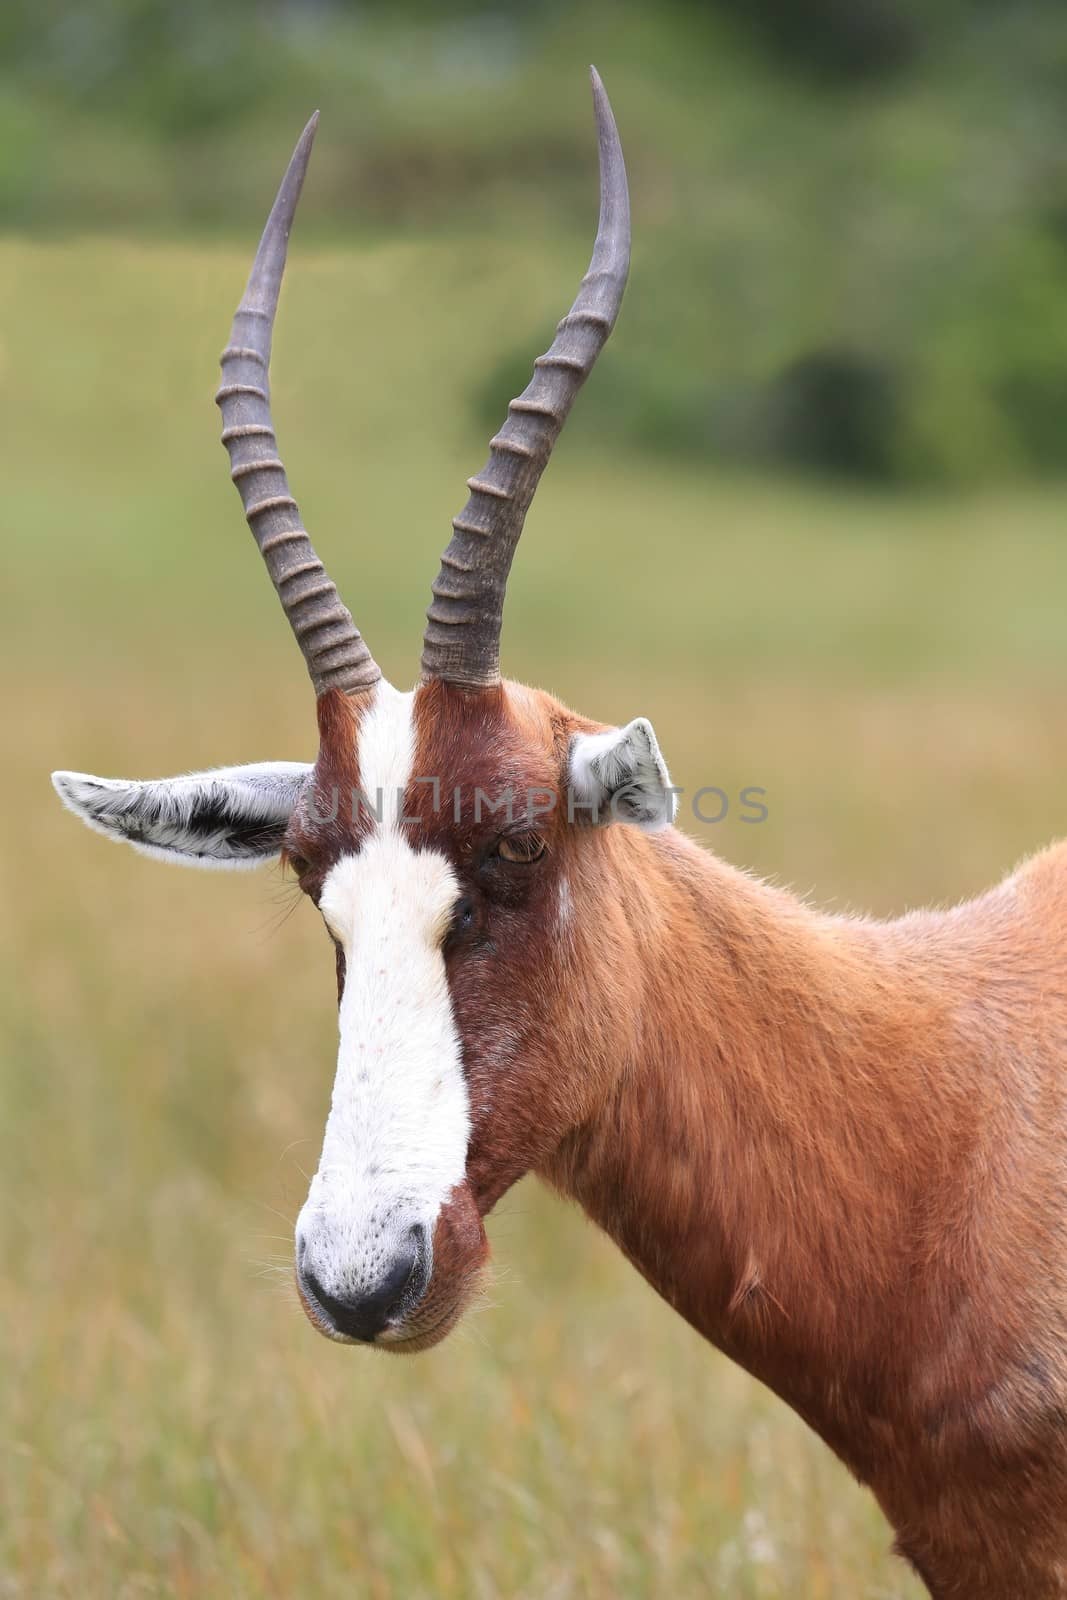 Blesbok antelope with white face and brown fur